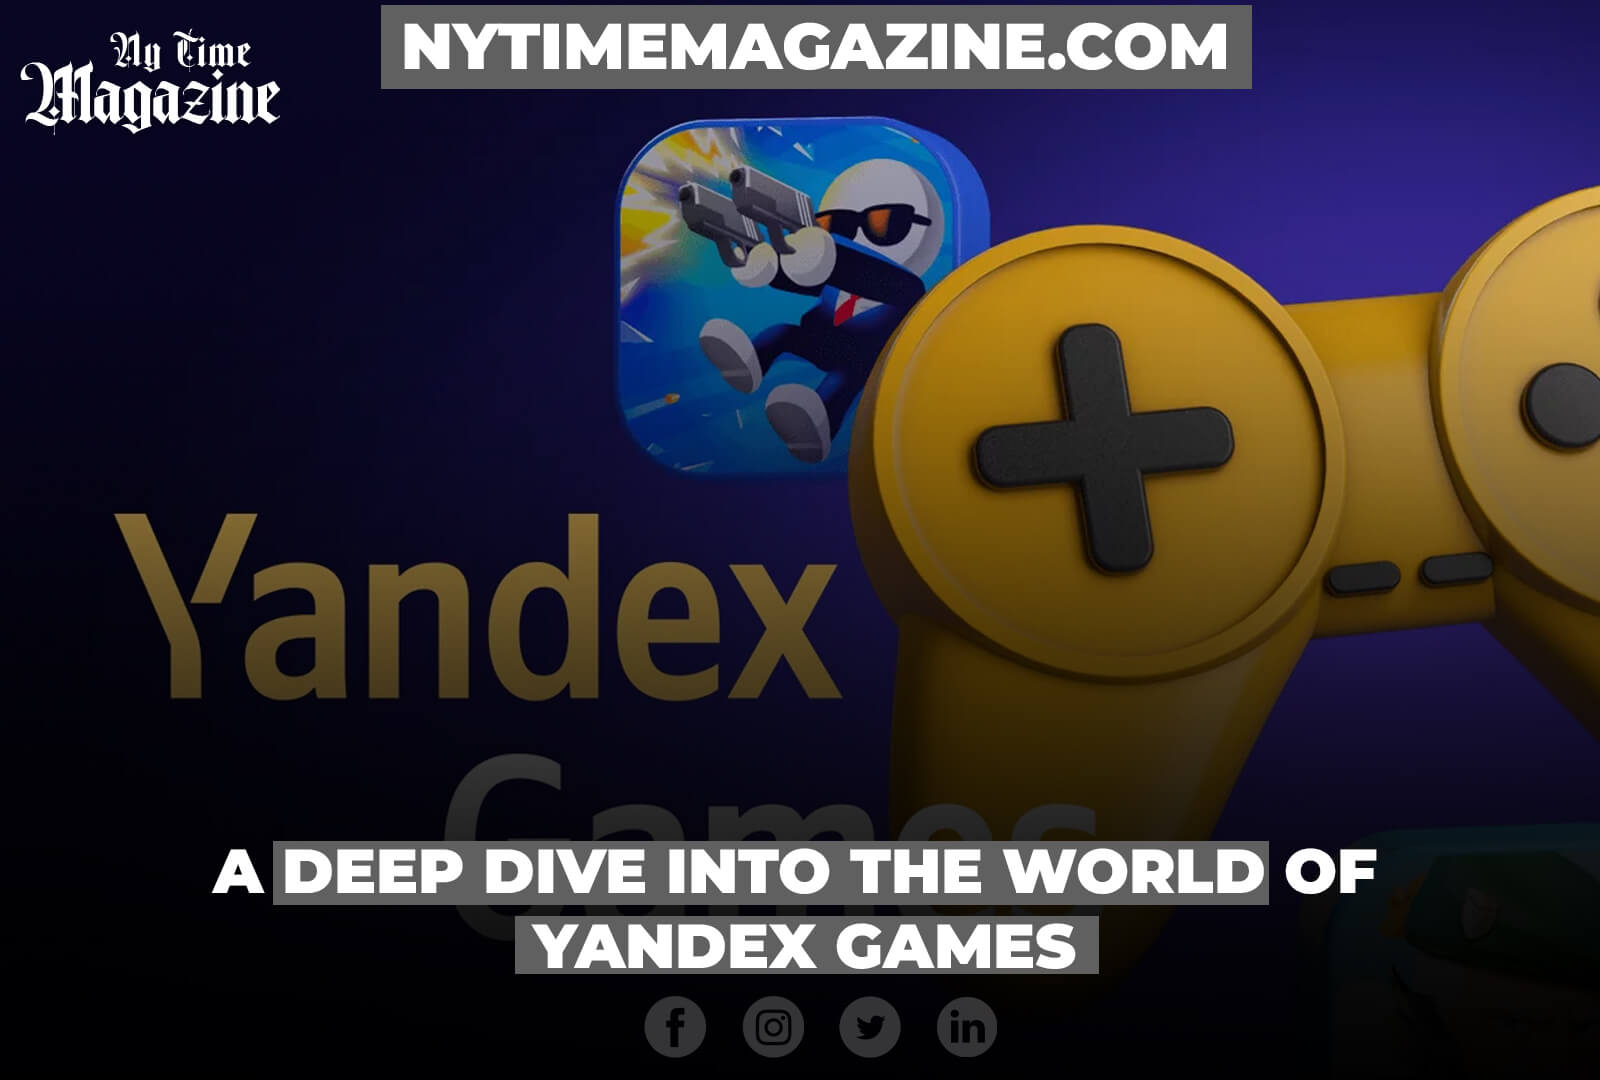 A Deep Dive into the World of Yandex Games